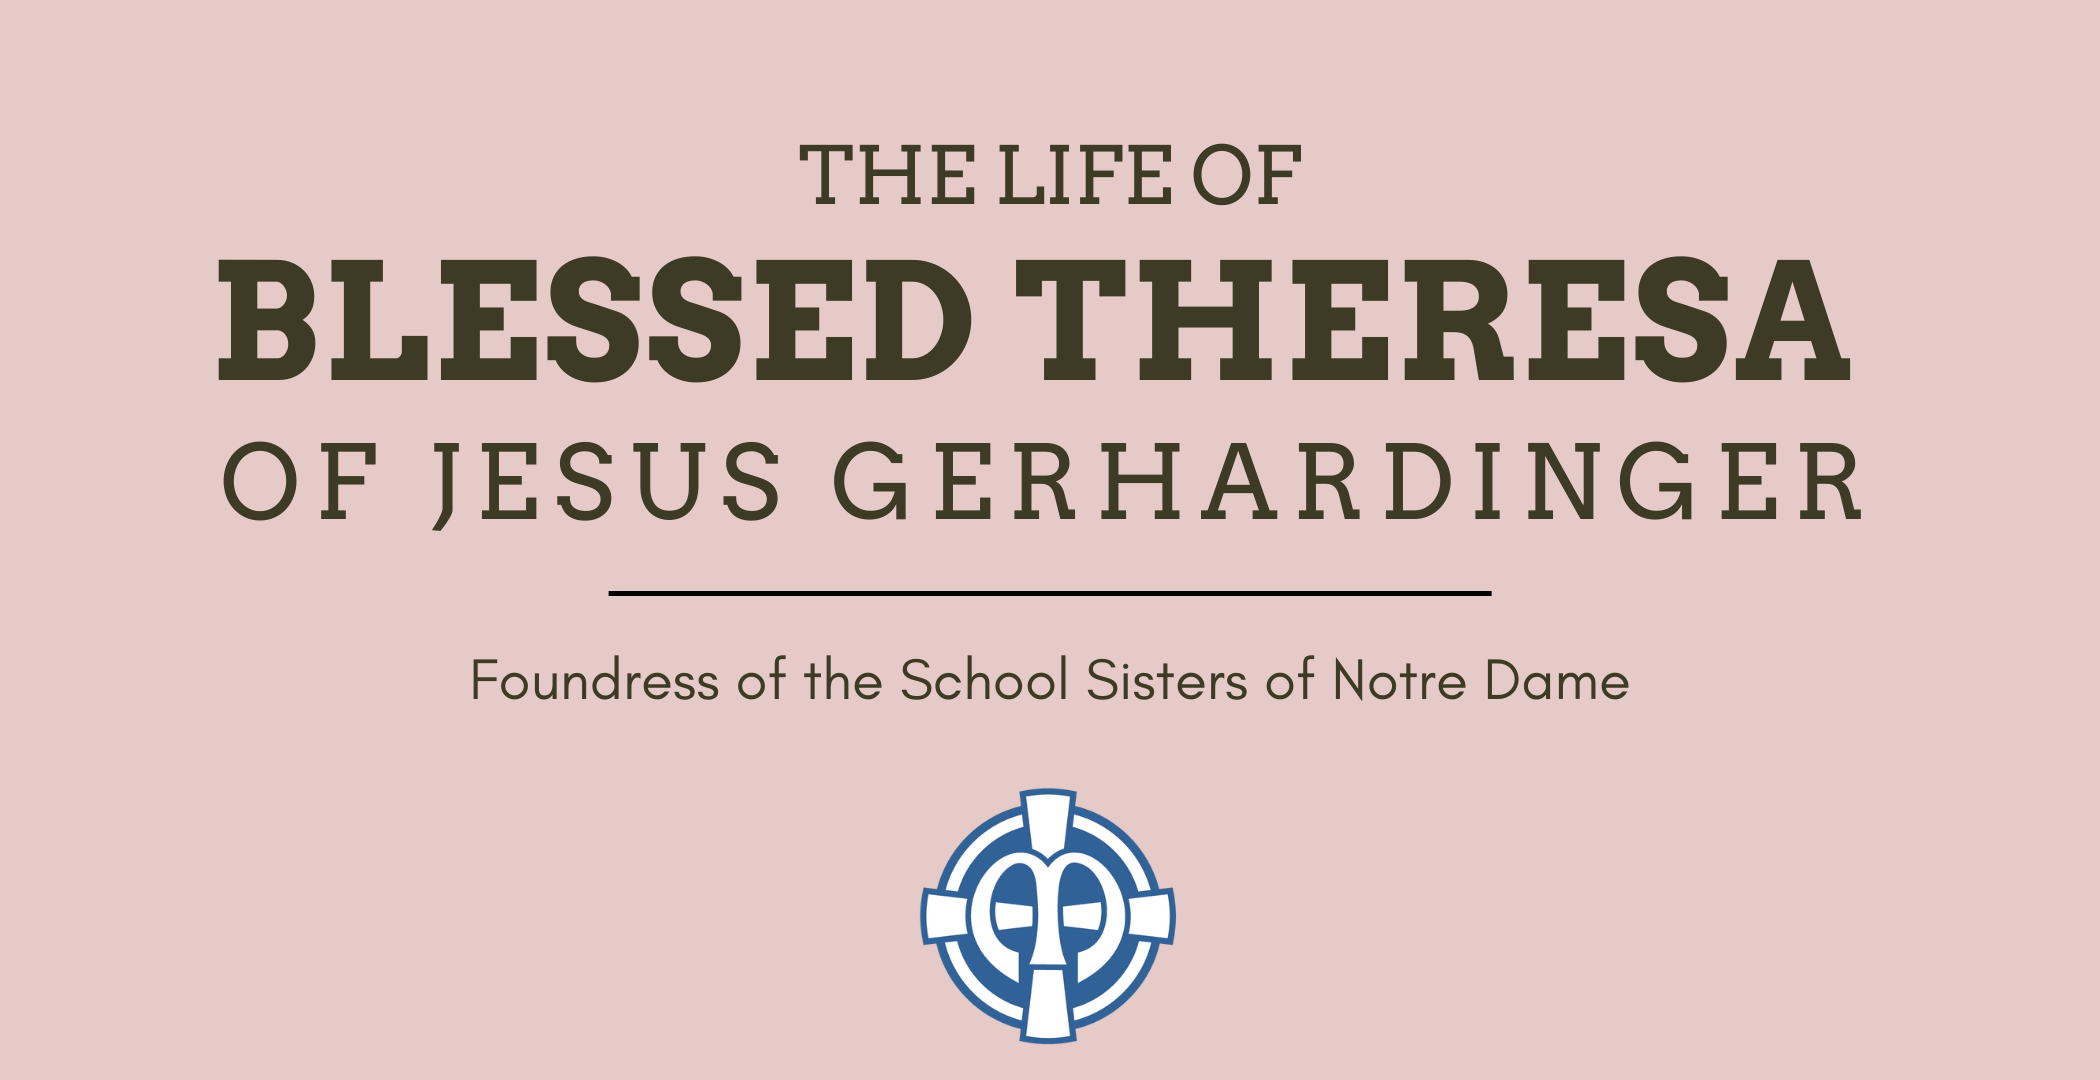 The life of Blessed Theresa of Jesus Gerhardinger, Foundress of the School Sisters of Notre Dame